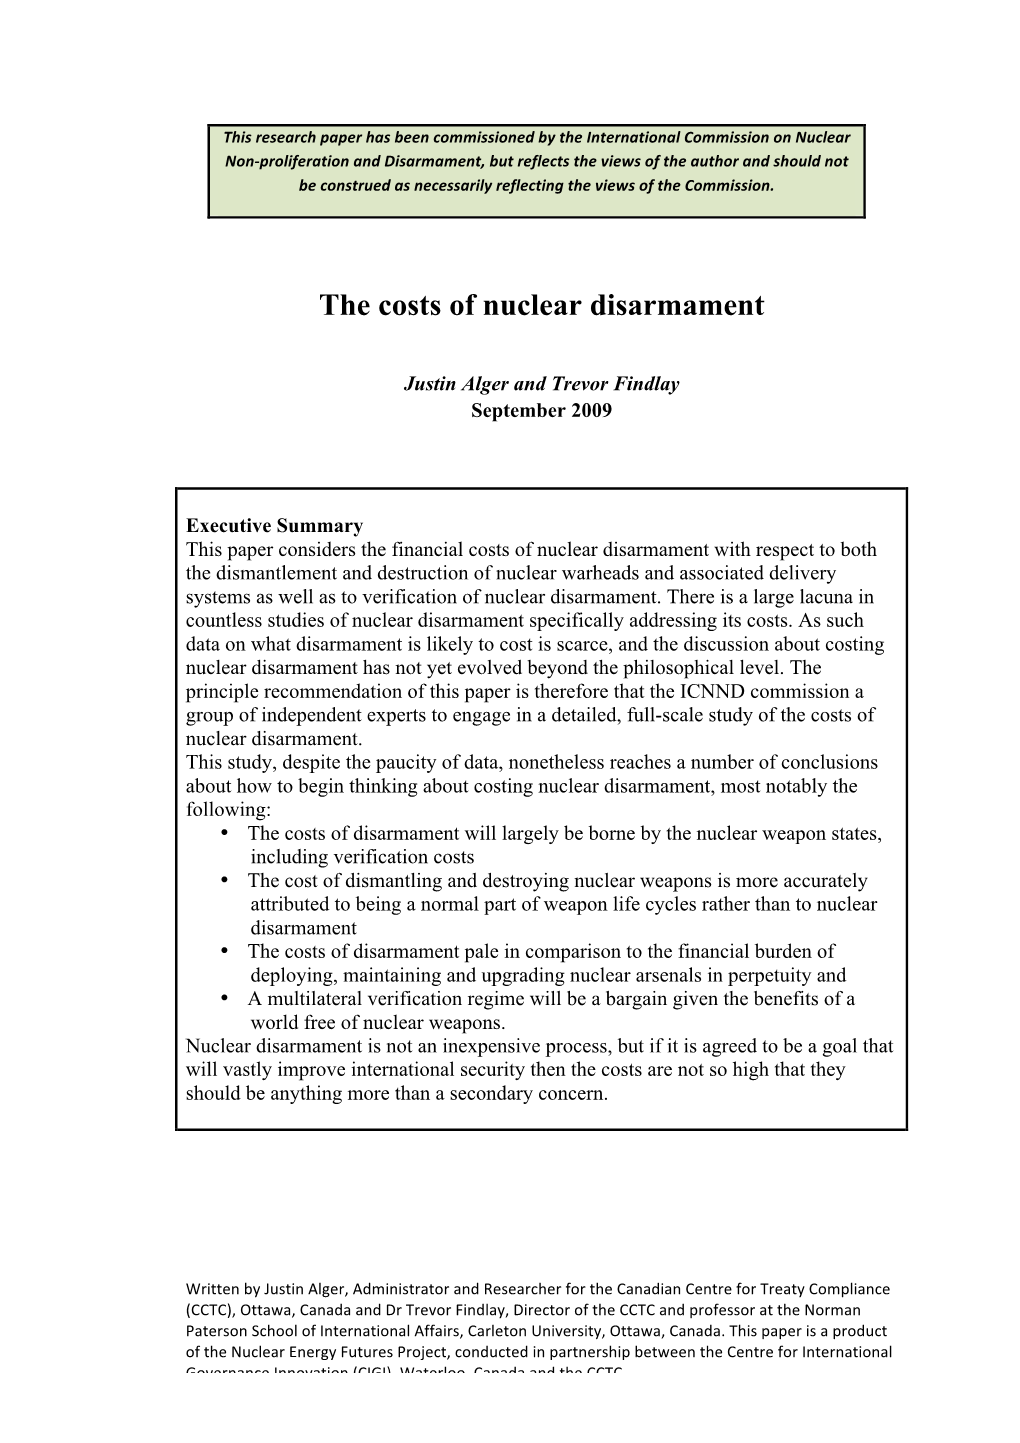 The Costs of Nuclear Disarmament